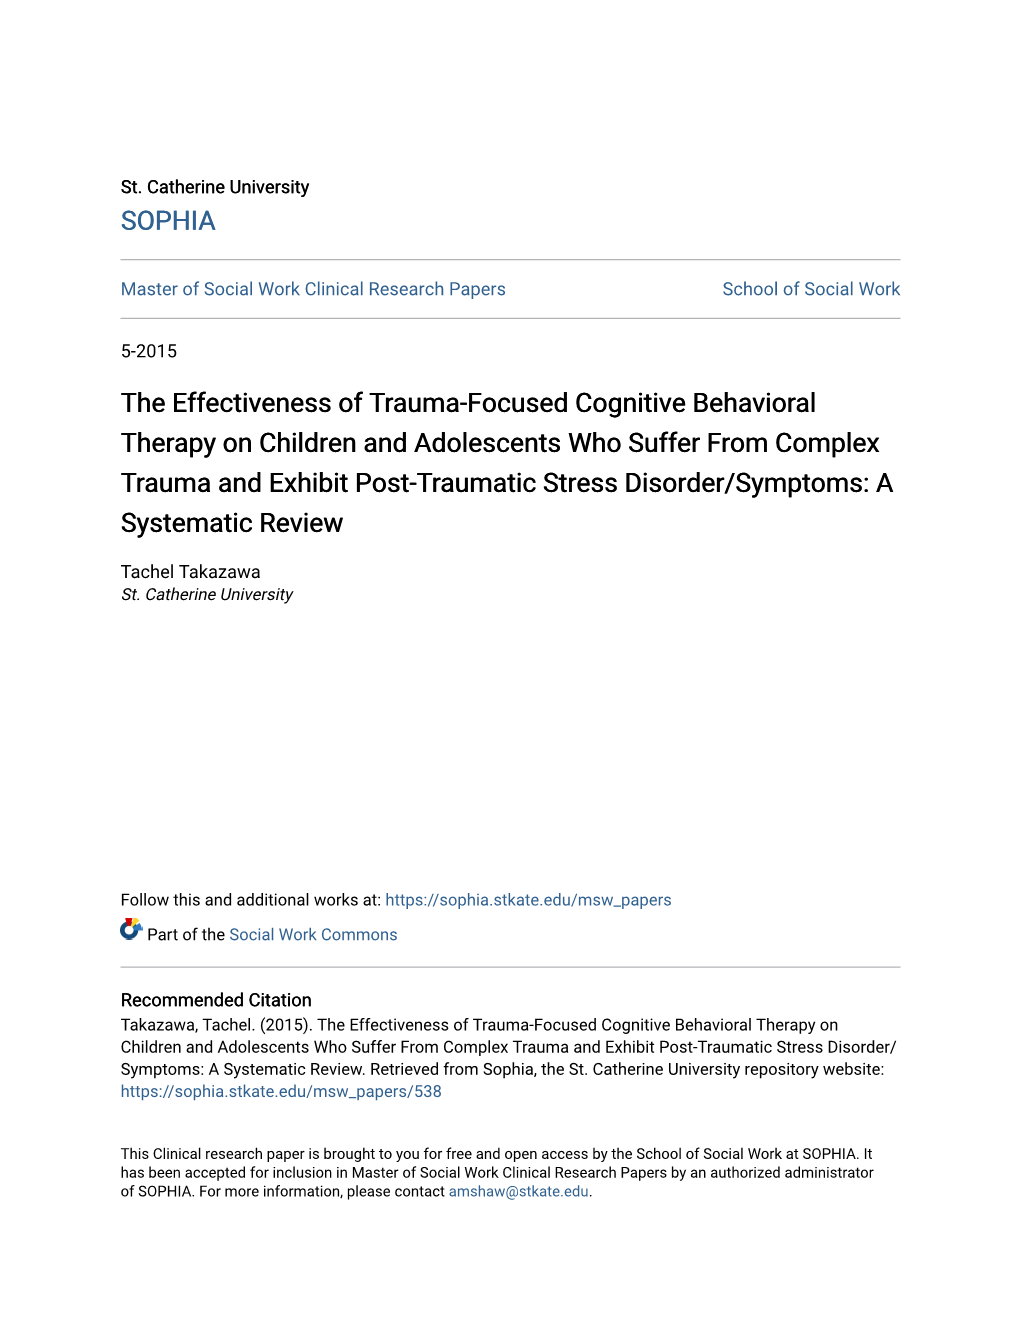 The Effectiveness of Trauma-Focused Cognitive Behavioral Therapy On